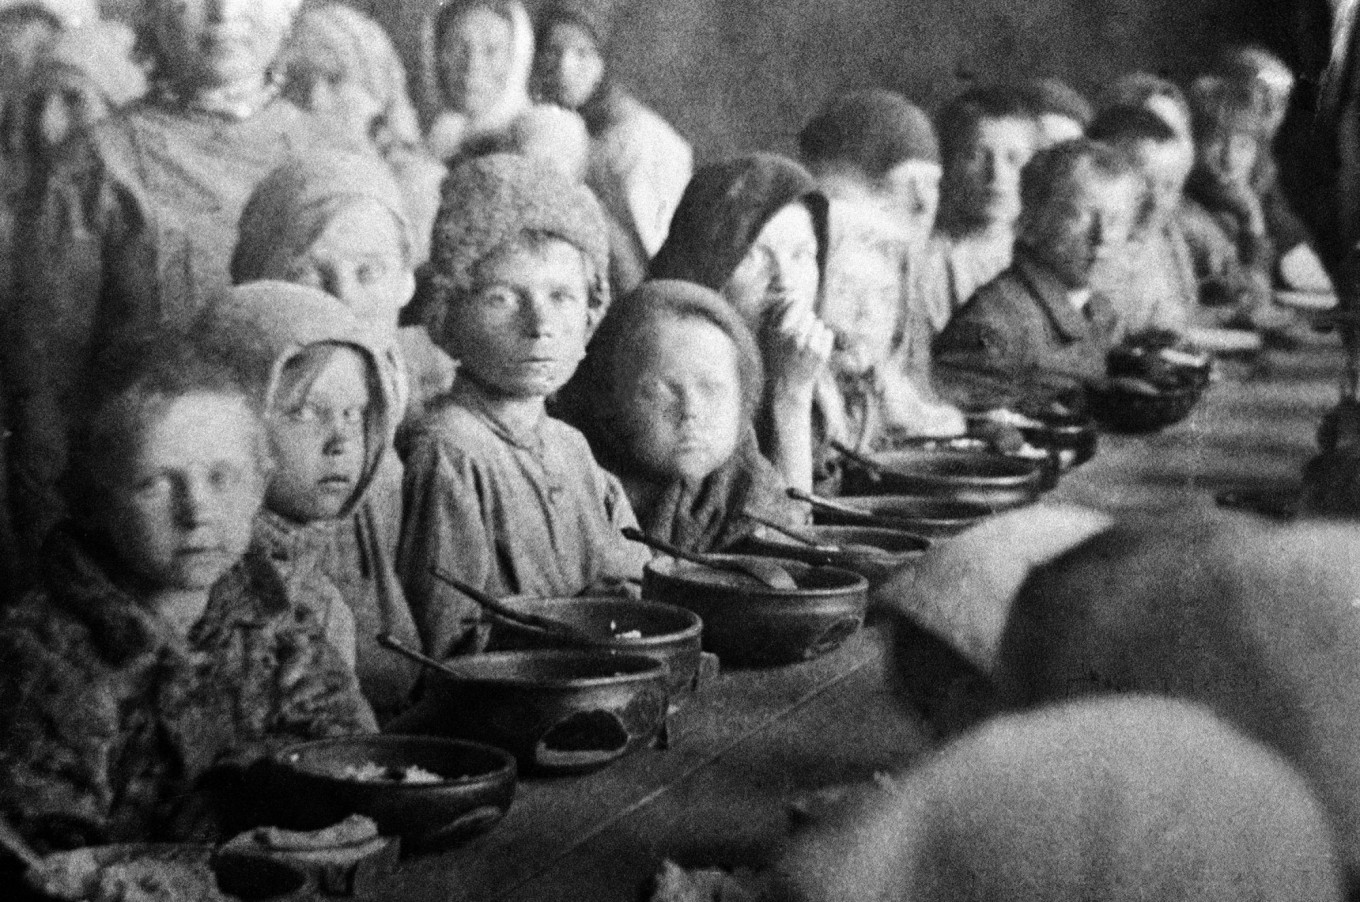  Children eat in a canteen for victims of starvation. Pokrovsk, Saratov province, 1922. TASS 